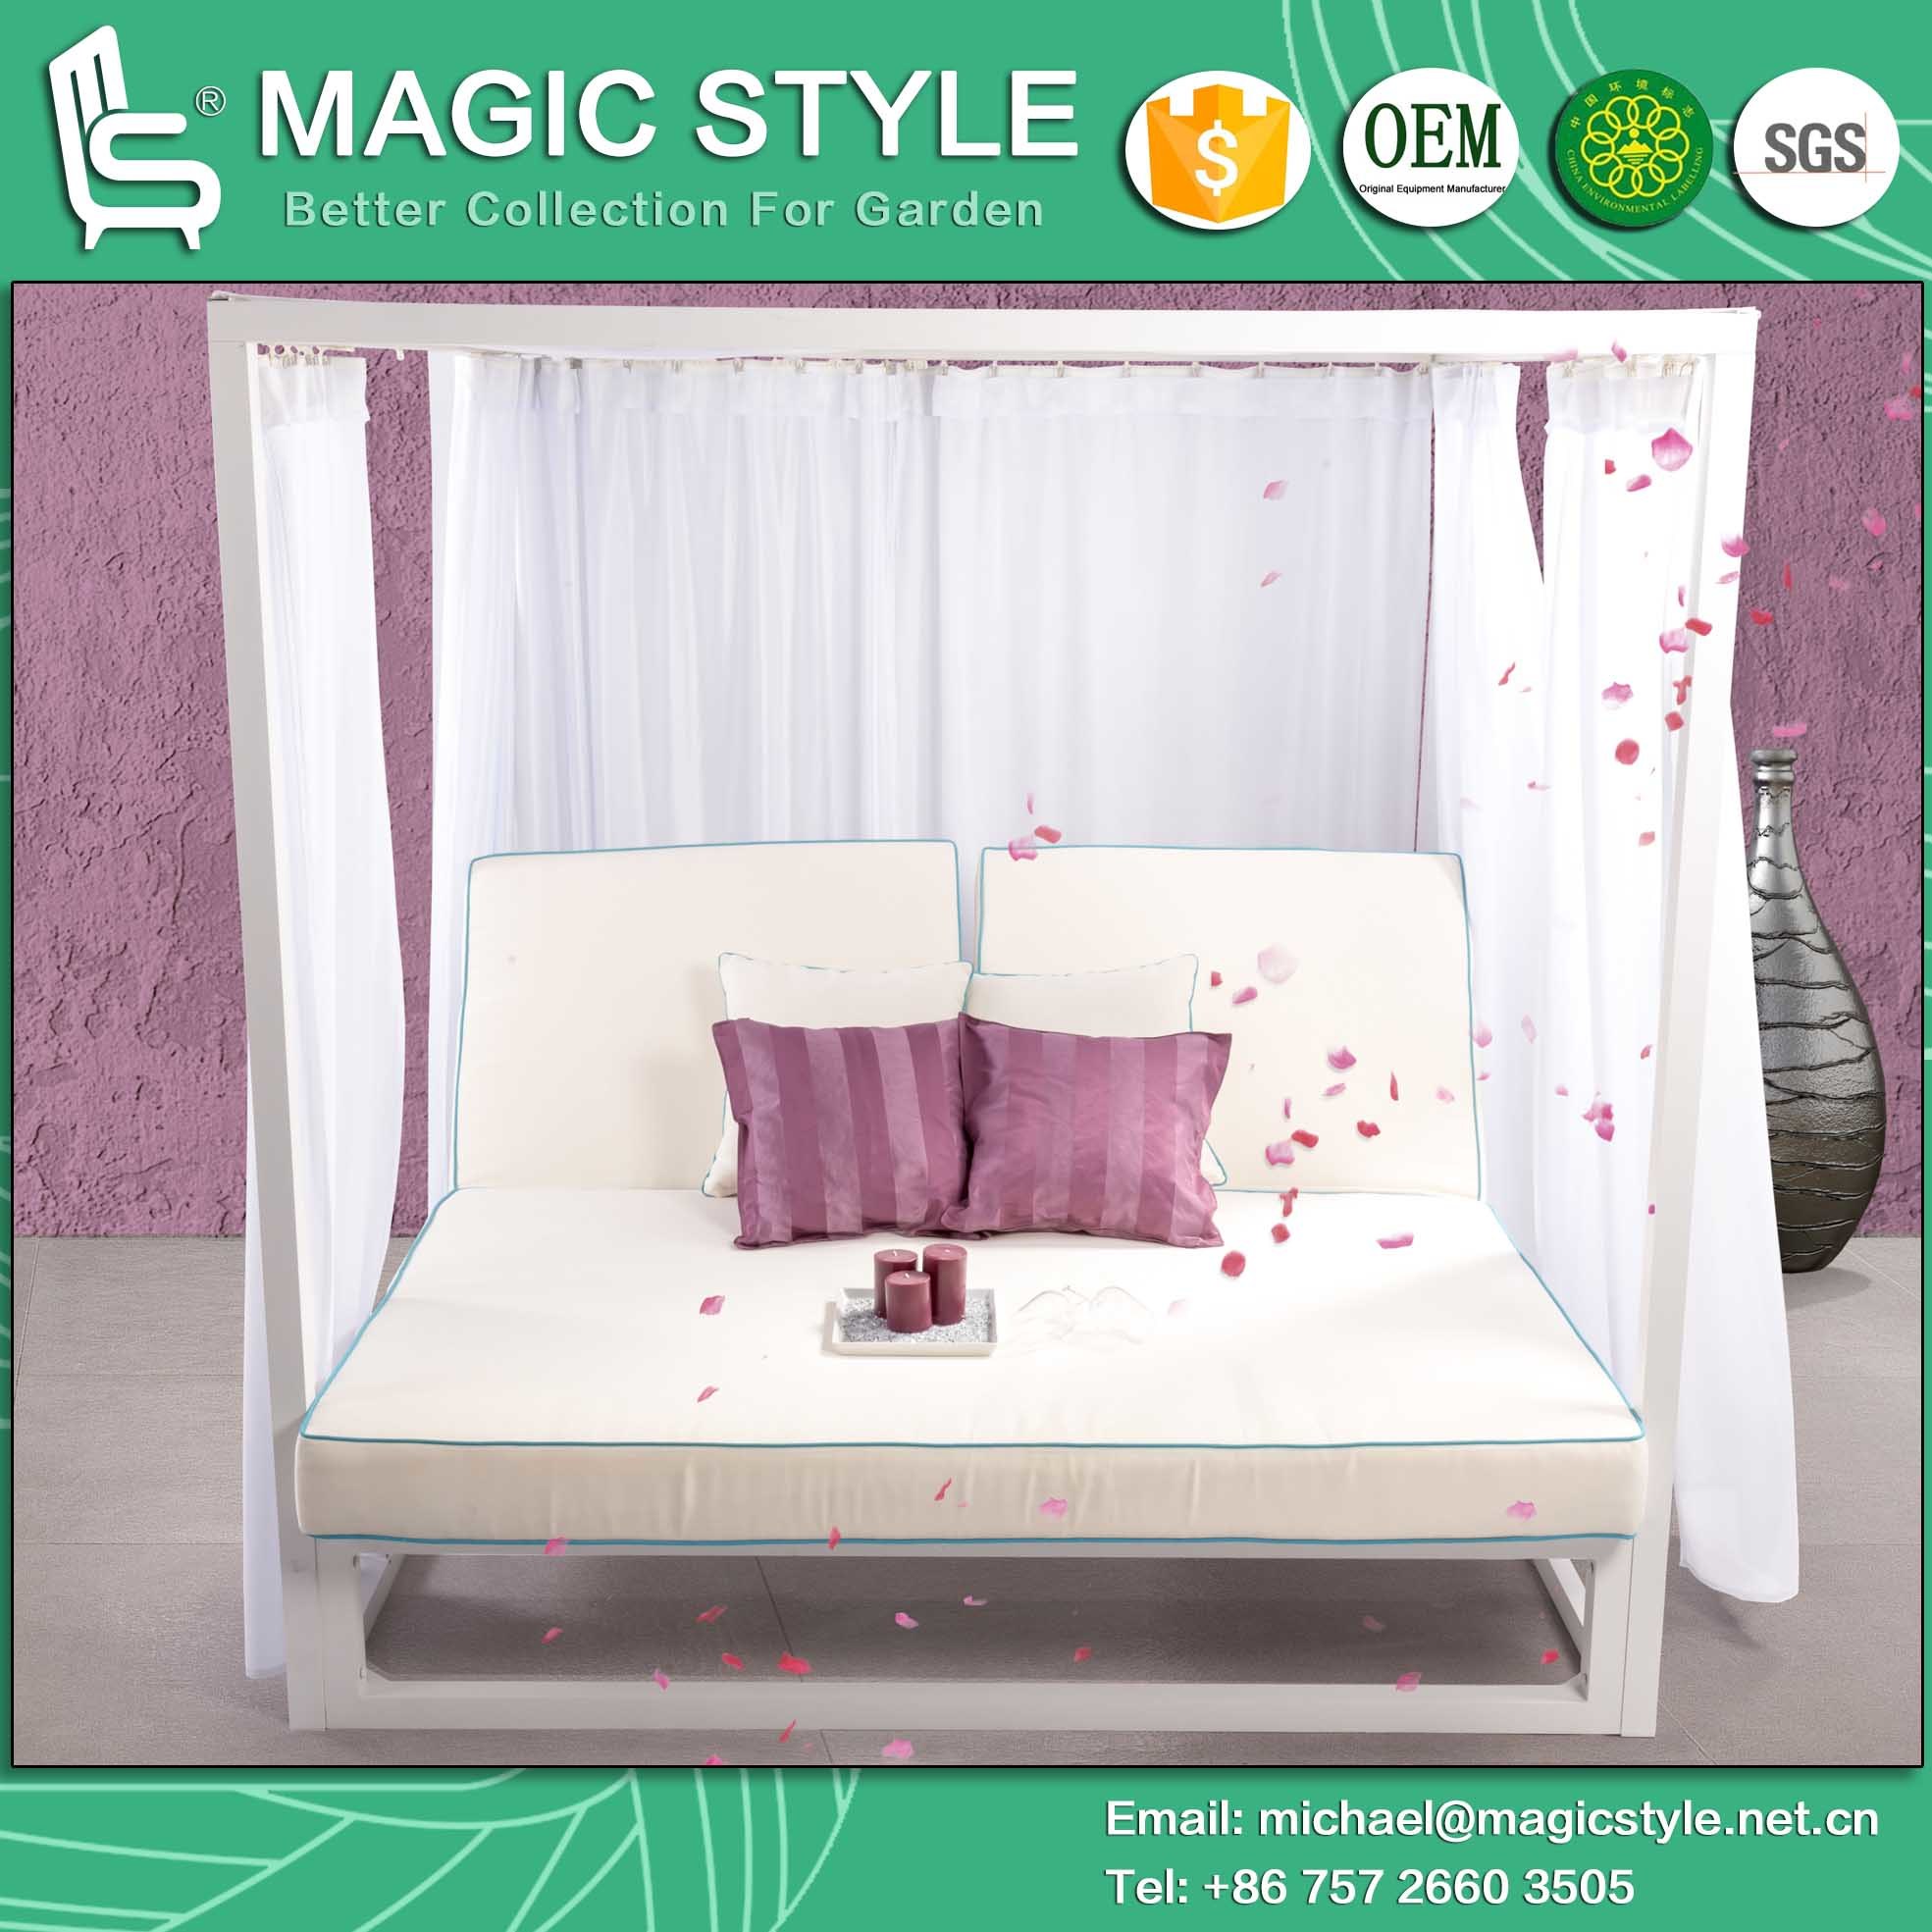 Ice Aluminum Daybed Garden Daybed Outdoor Daybed Luxury Daybed Double-Bed (MAGIC STYLE)